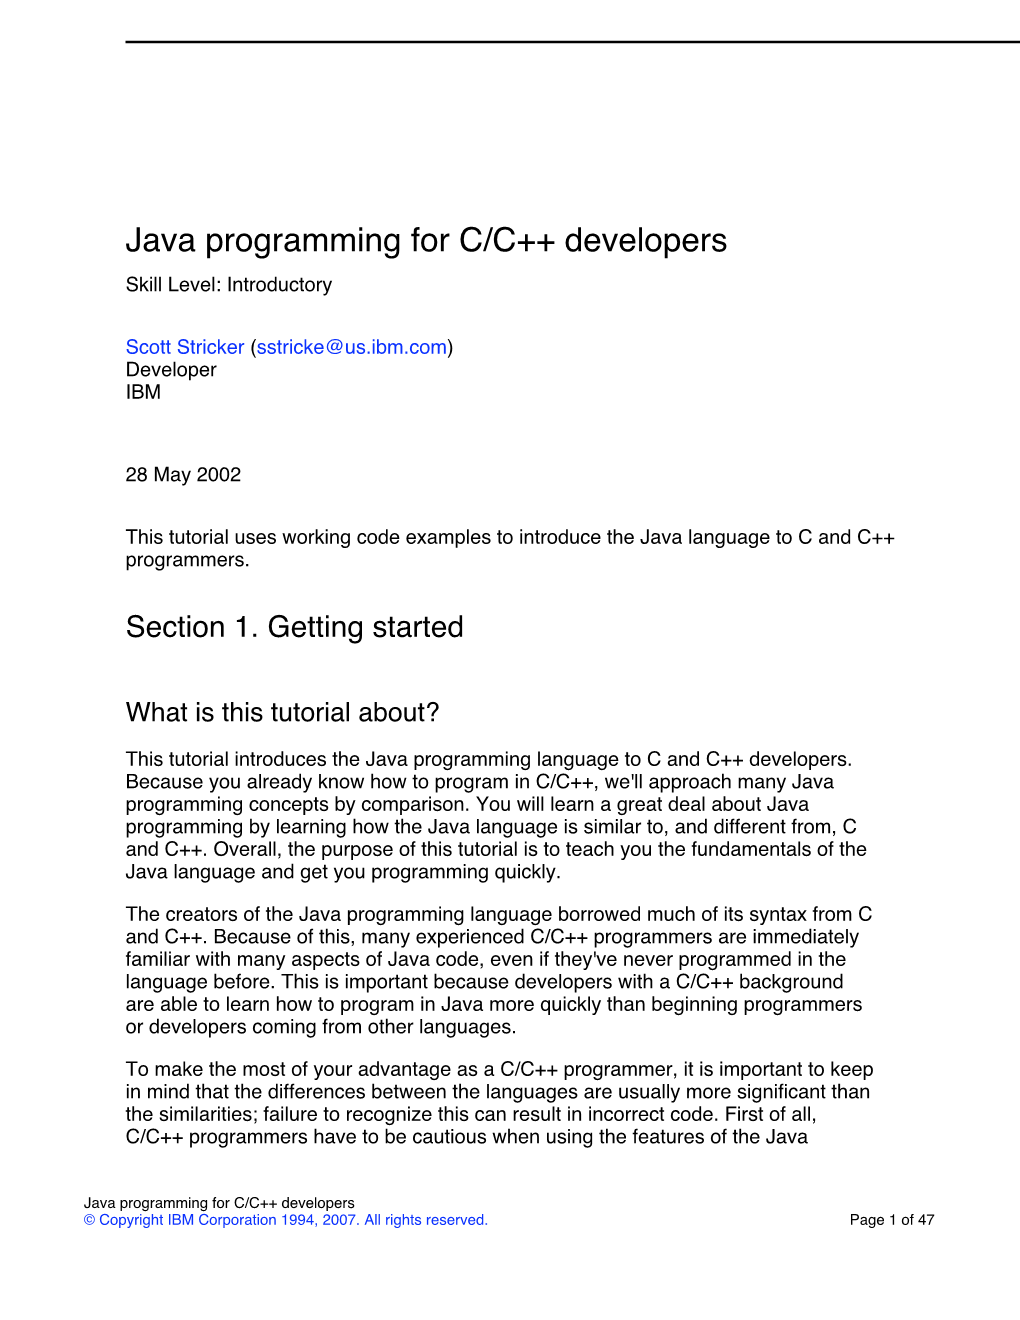 Java Programming for C/C++ Developers Skill Level: Introductory